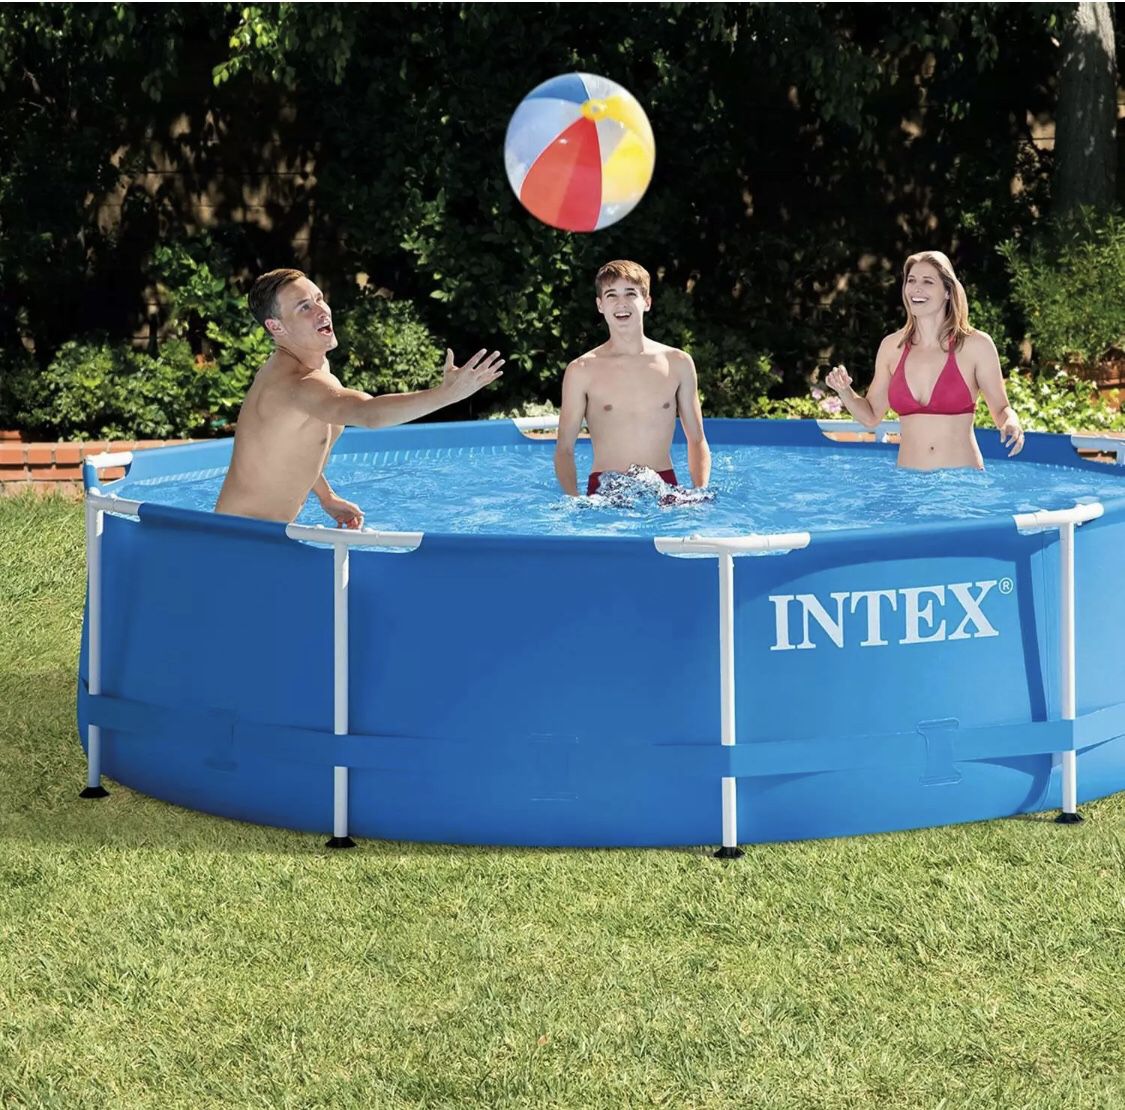 Intex 10' ftx 30" inches Metal Frame Round Above Ground Swimming Pool Set w/ Filter Pump